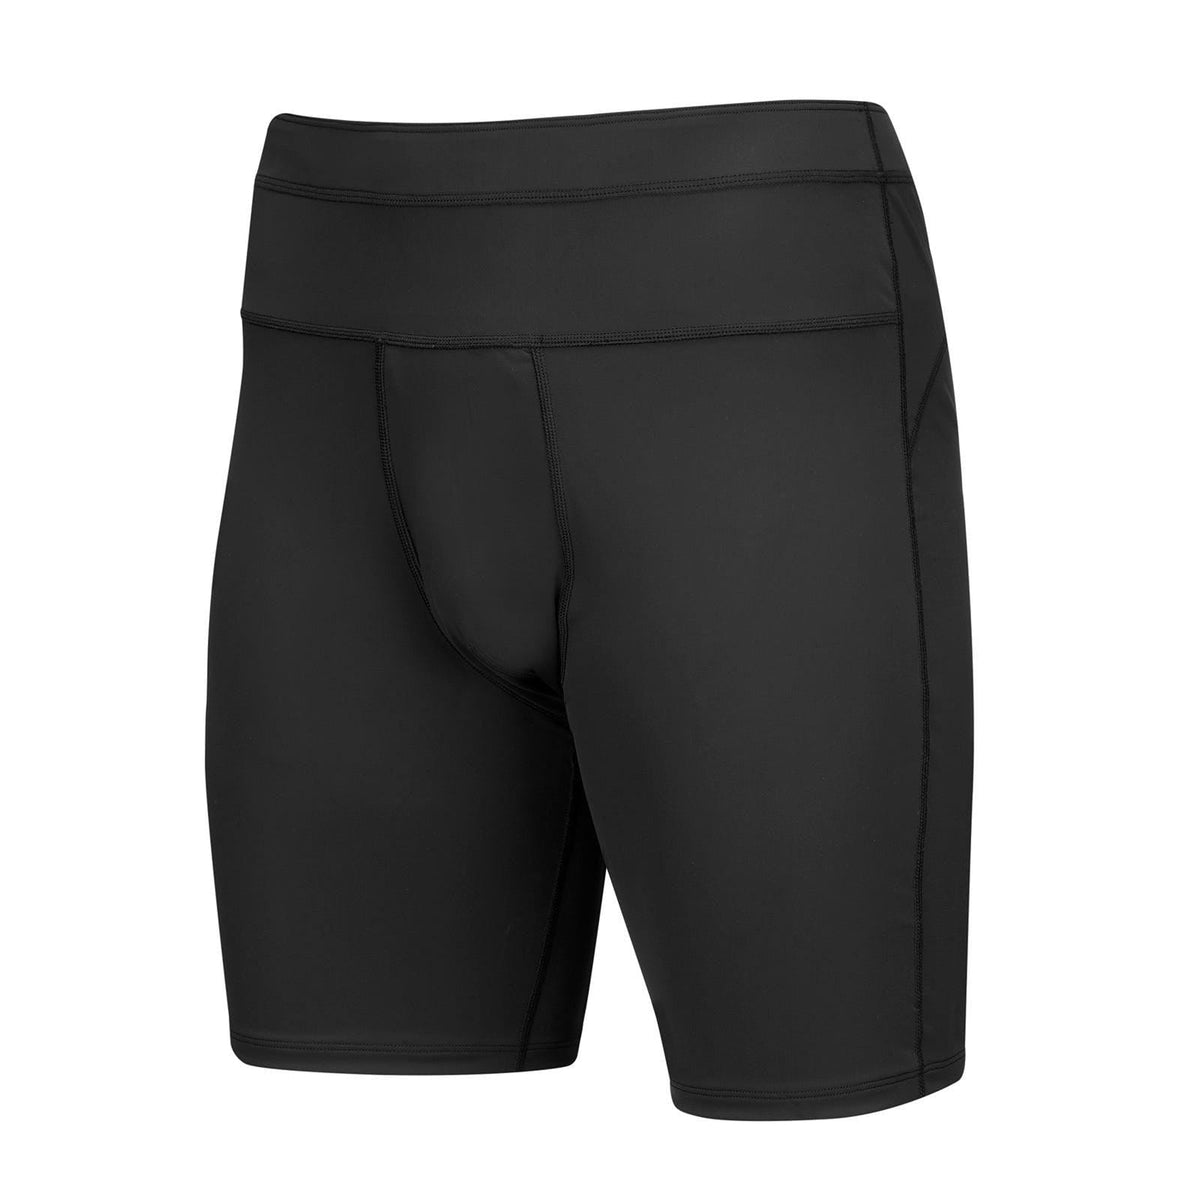 Protective Riding Shorts - Factory Recreation